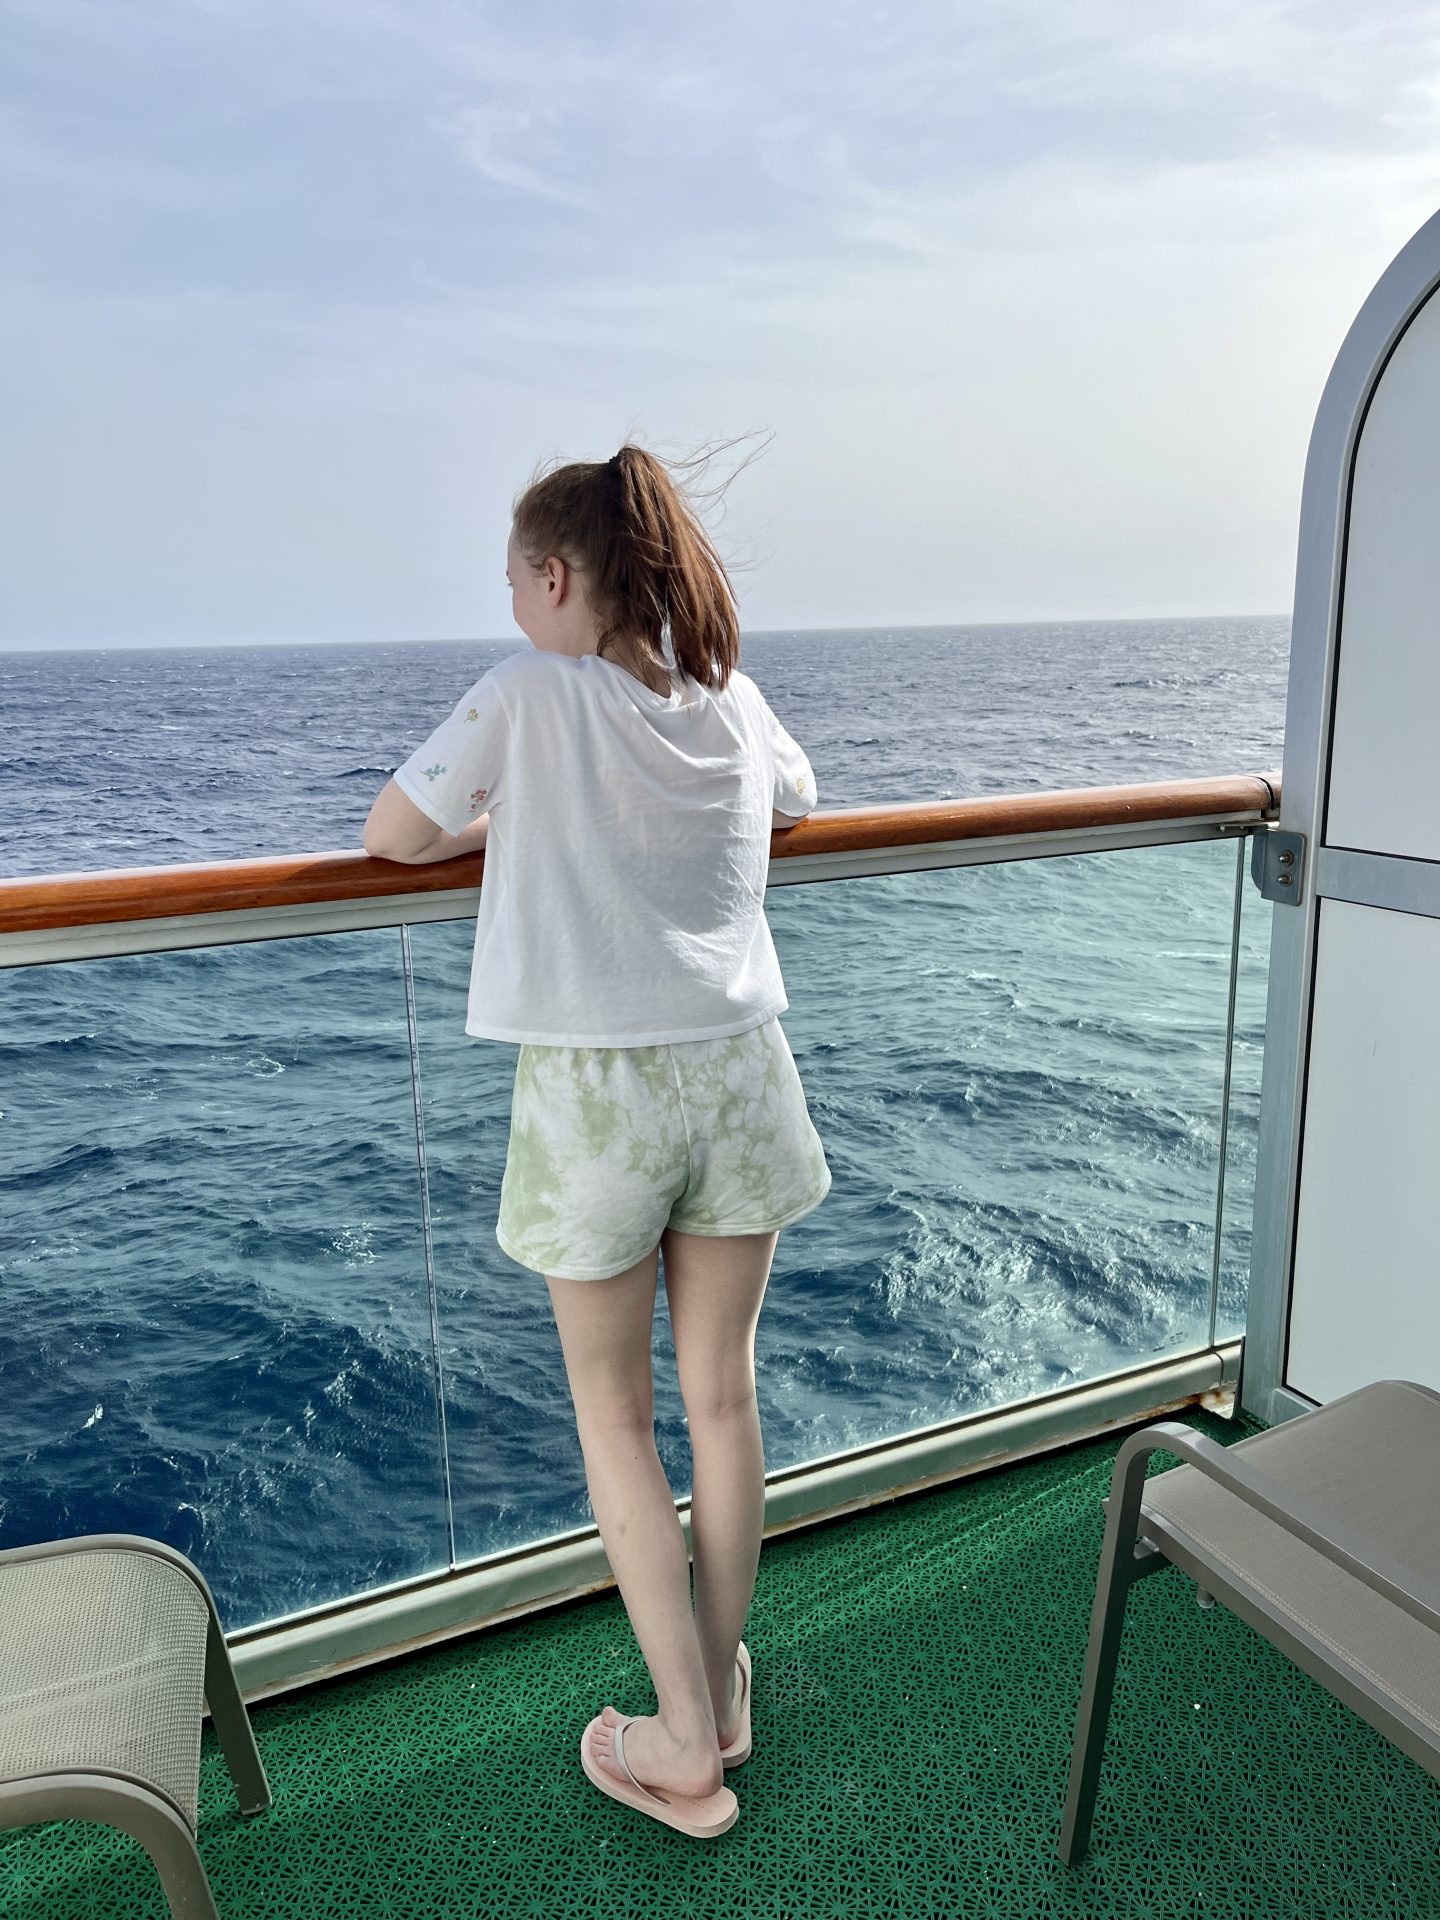 Pippa on her cabin's balcony, arms resting on the handrail and looking out to sea. She's wearing a white t-shirt, green tie dye shorts and flip flops.